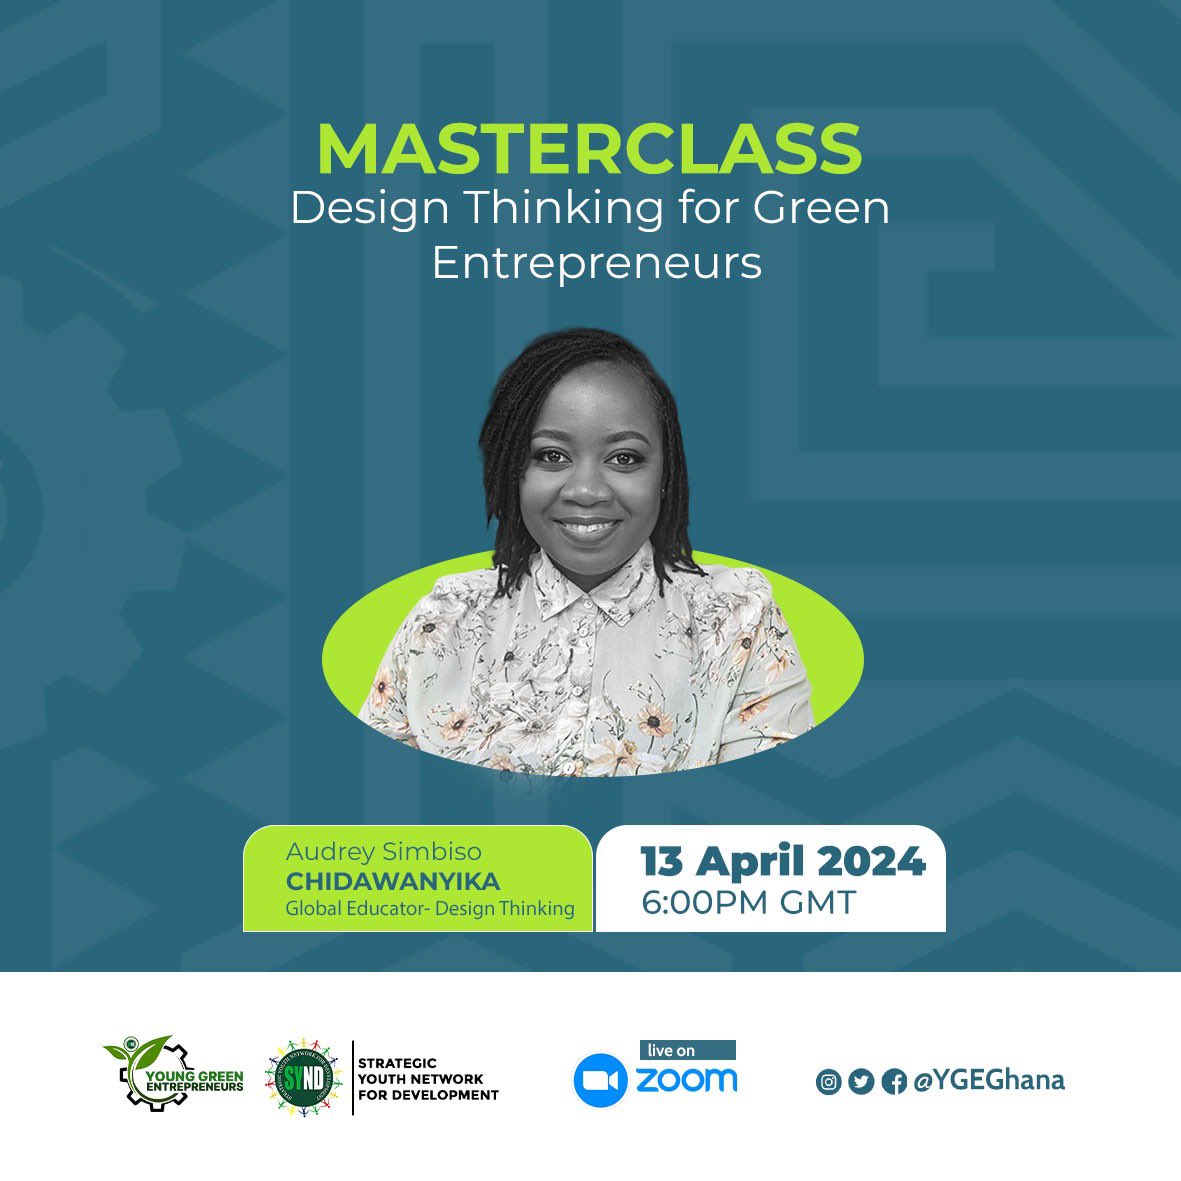 Are you a green entrepreneur looking to make a positive impact on the environment? This free masterclass on design thinking for green entrepreneurs is for you! Join @audreysimbiso , a global educator in design thinking, on ... #GreenInnovations #SYNDGhana #ClimateAction 1/2